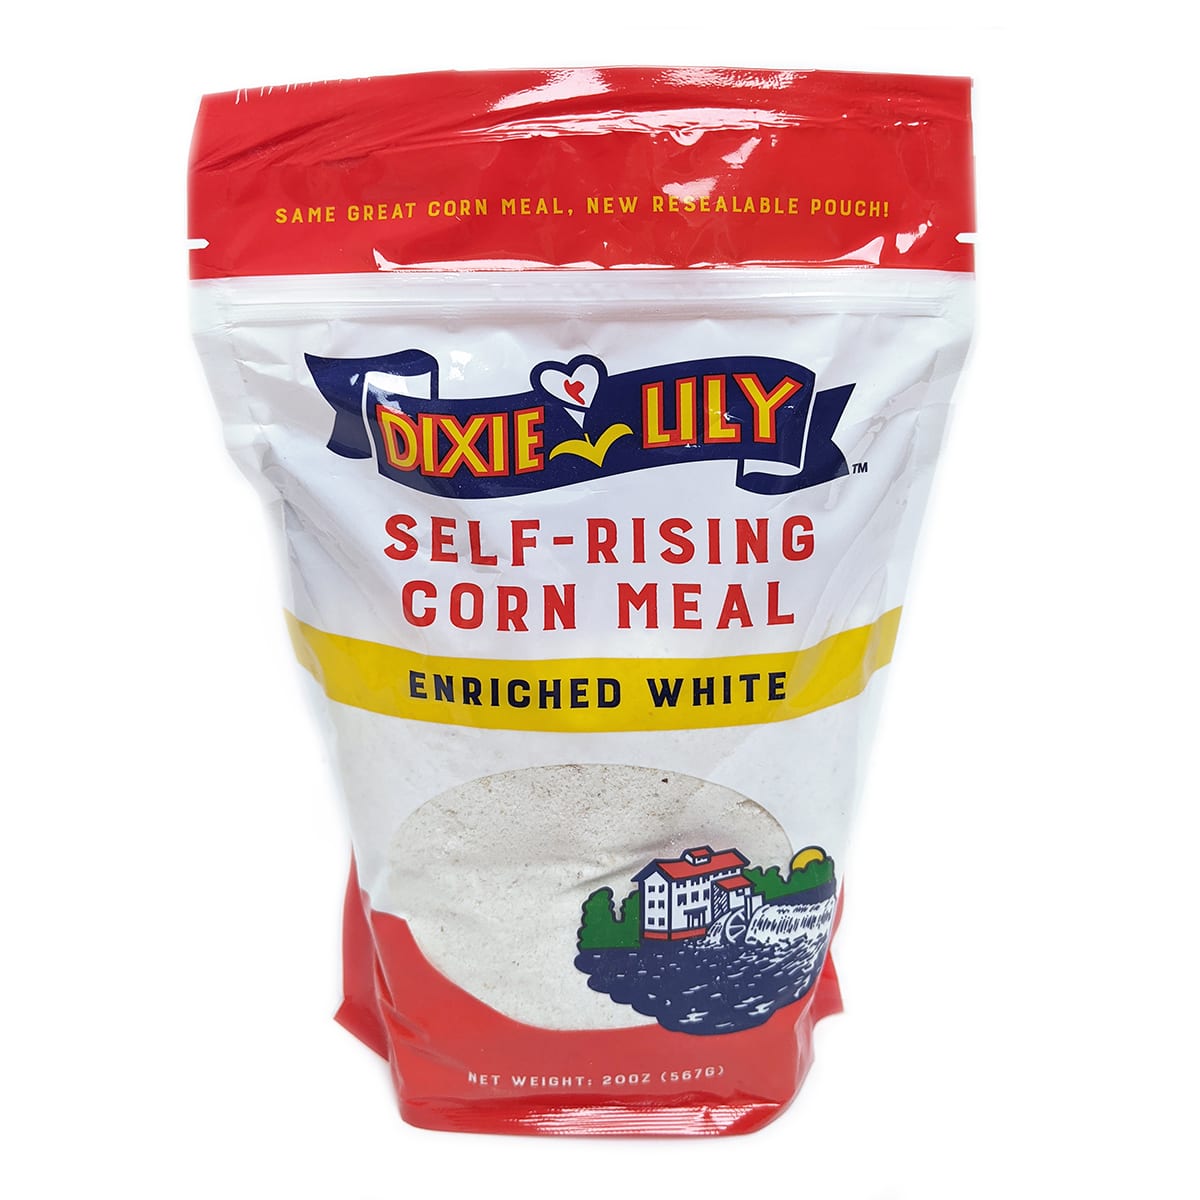 Dixie Lily Self Rising Corn Meal Enriched White 20oz